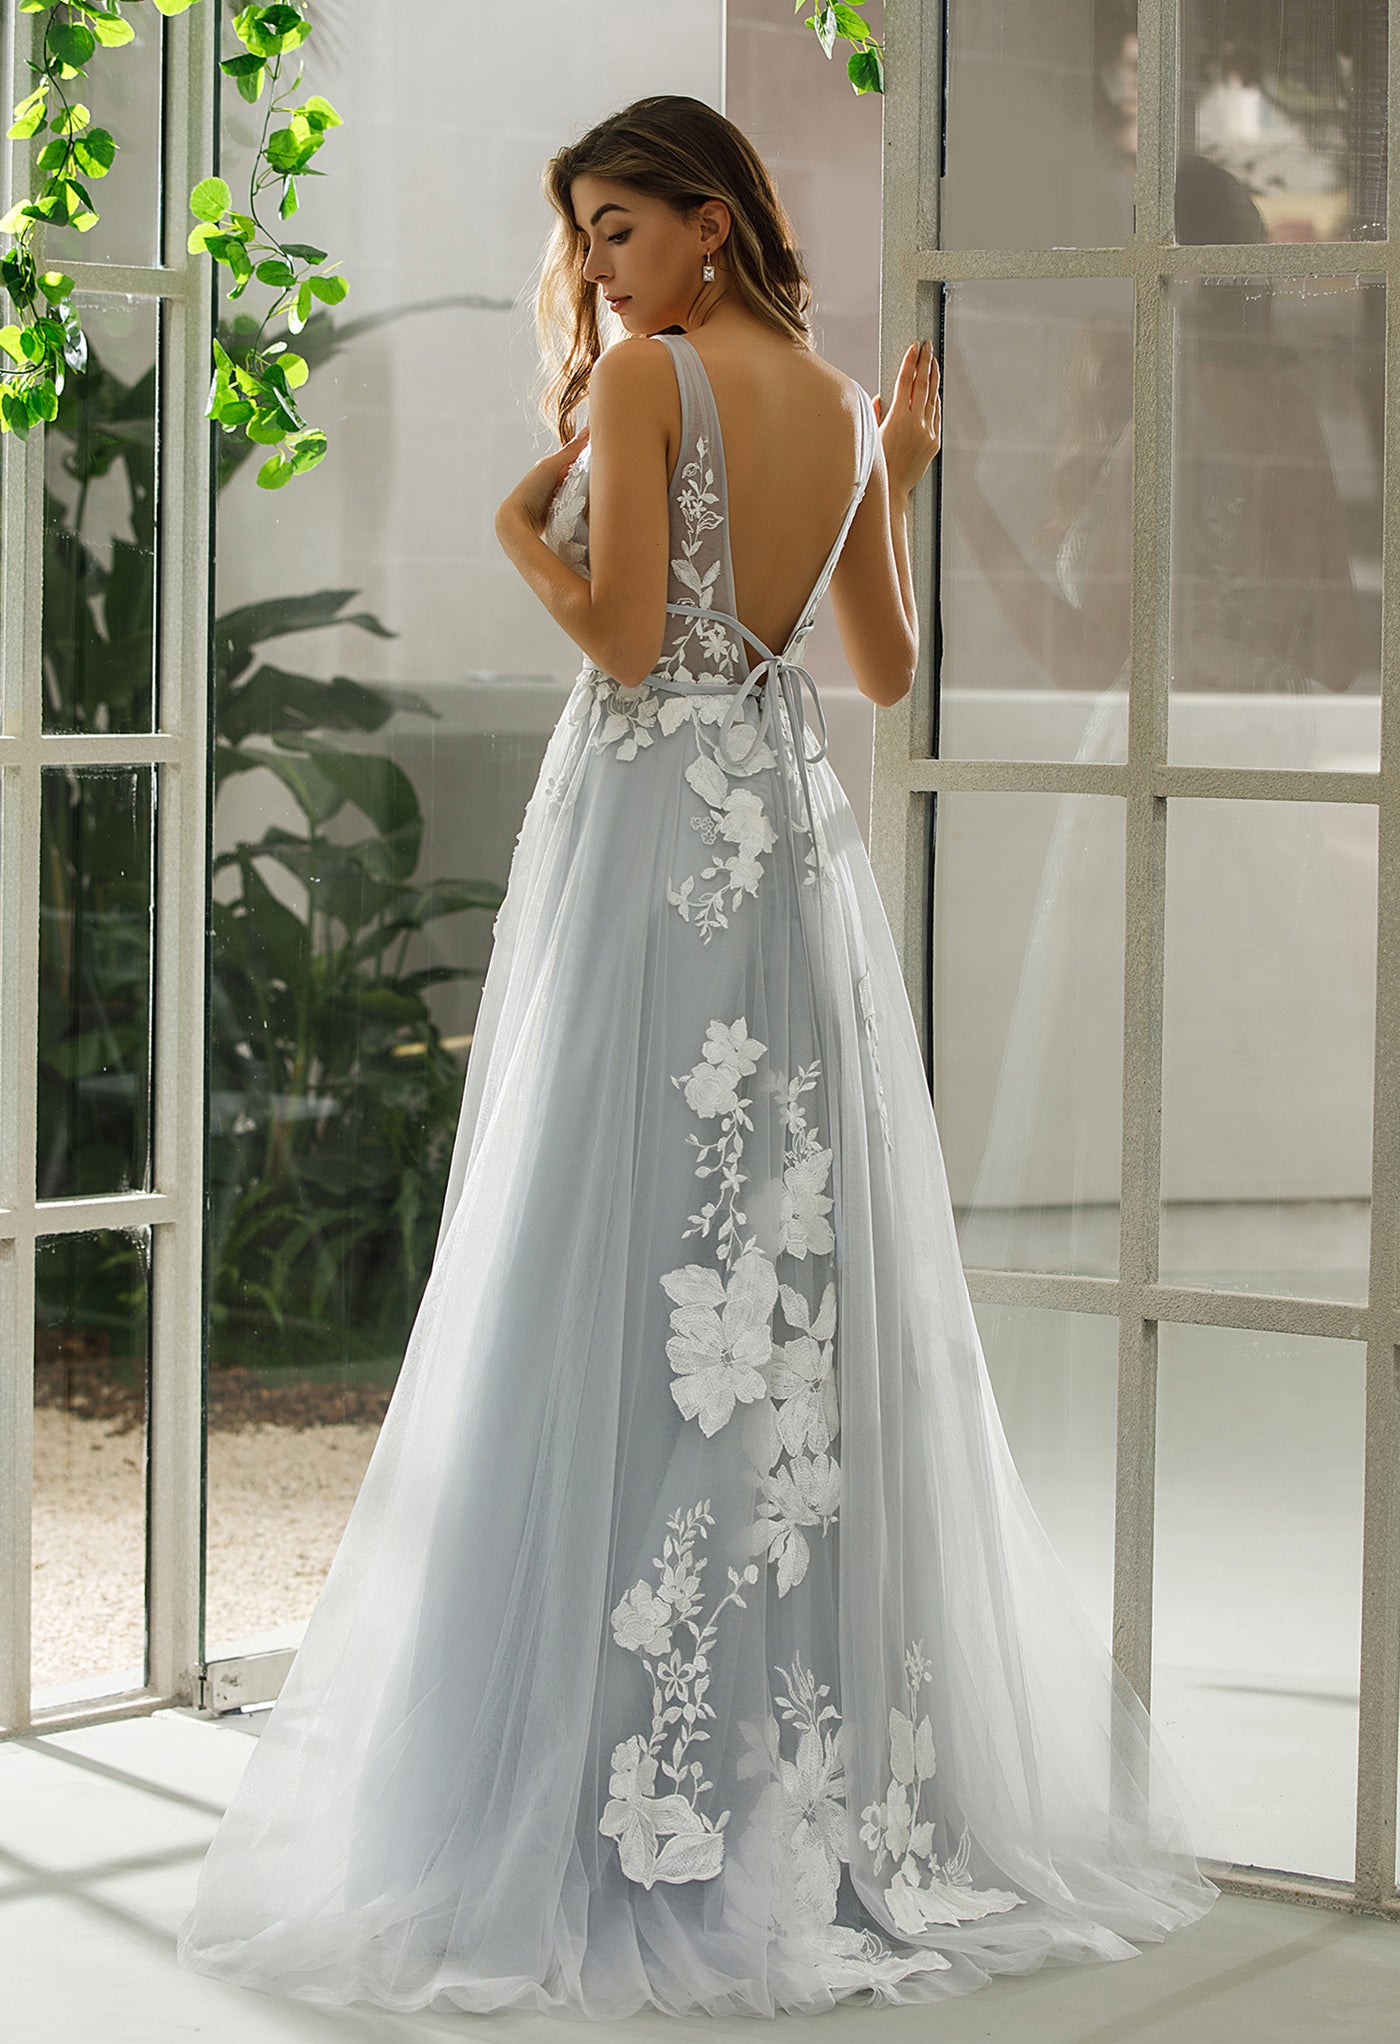 The back view of a woman in a Bergamot Bridal Plunging V-Neck A-Line Ball Gown Bridal Gown at a bridal shop in London.